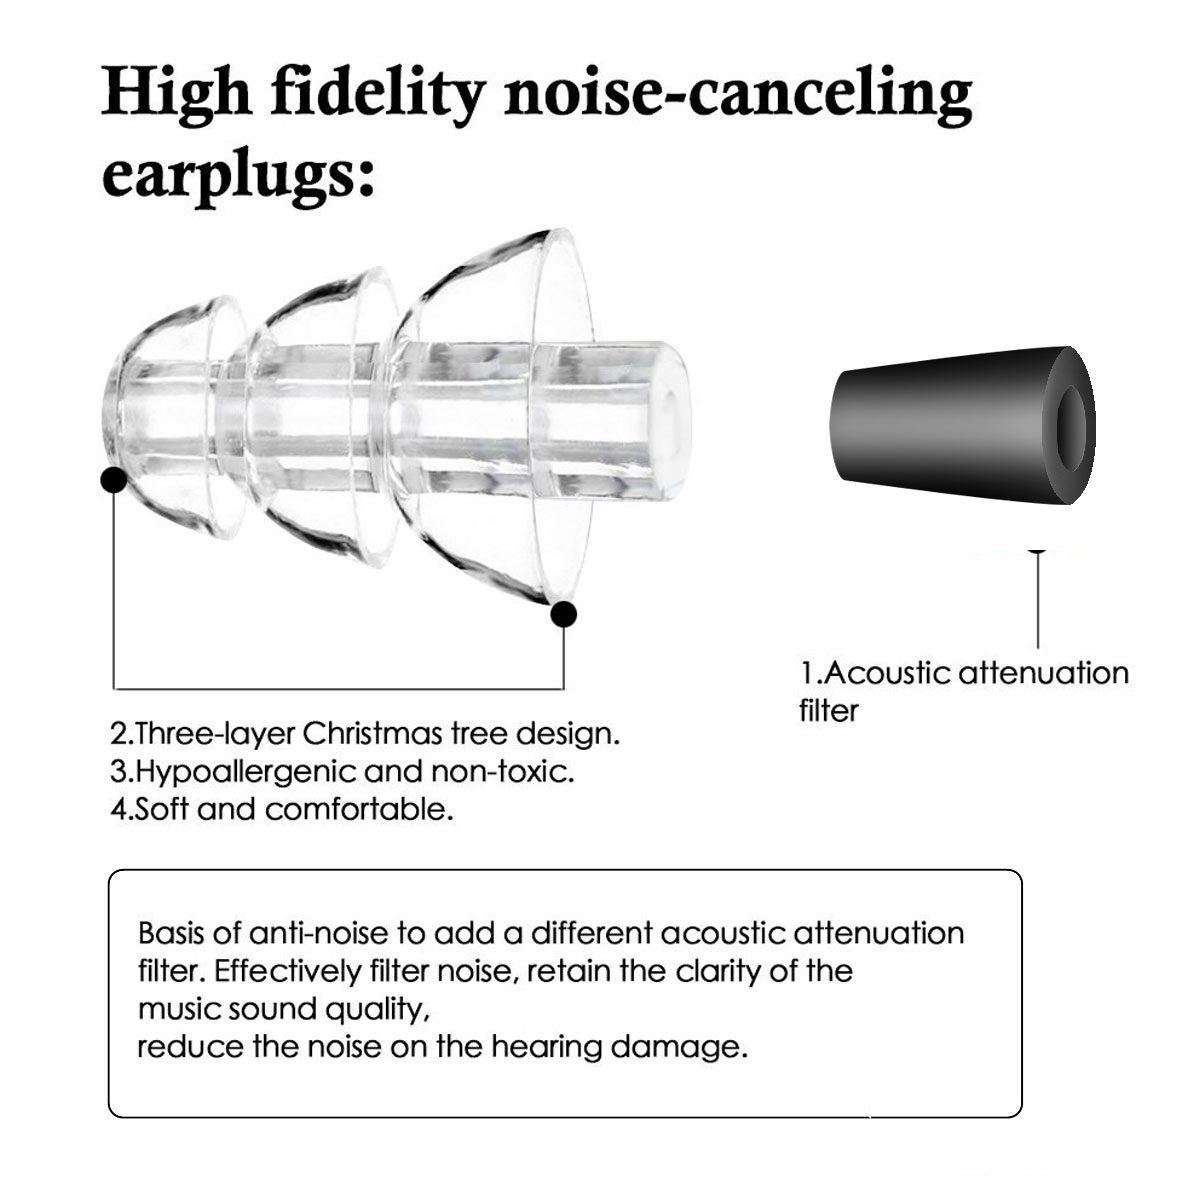 1-Pair-Noise-Cancelling-Hearing-Protection-Earplugs-For-Concerts-Musician-Motorcycles-Reusable-Silic-1369084